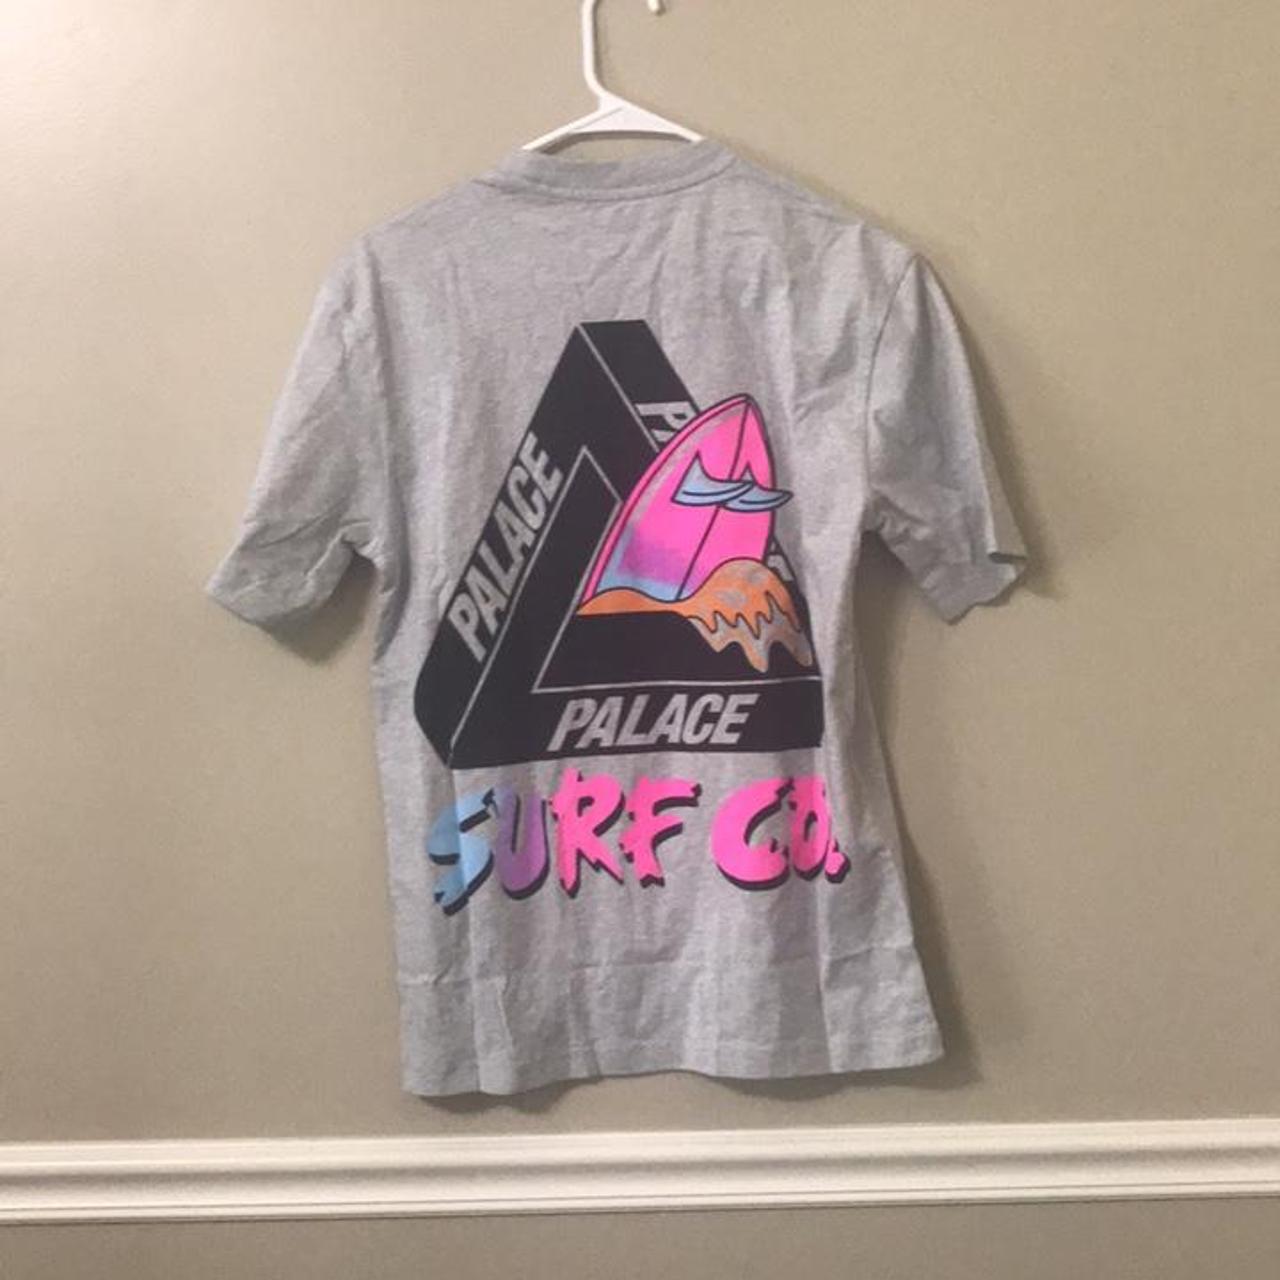 Product Image 2 - Palace Tri-Surf Co T-shirt
Brand new
Size